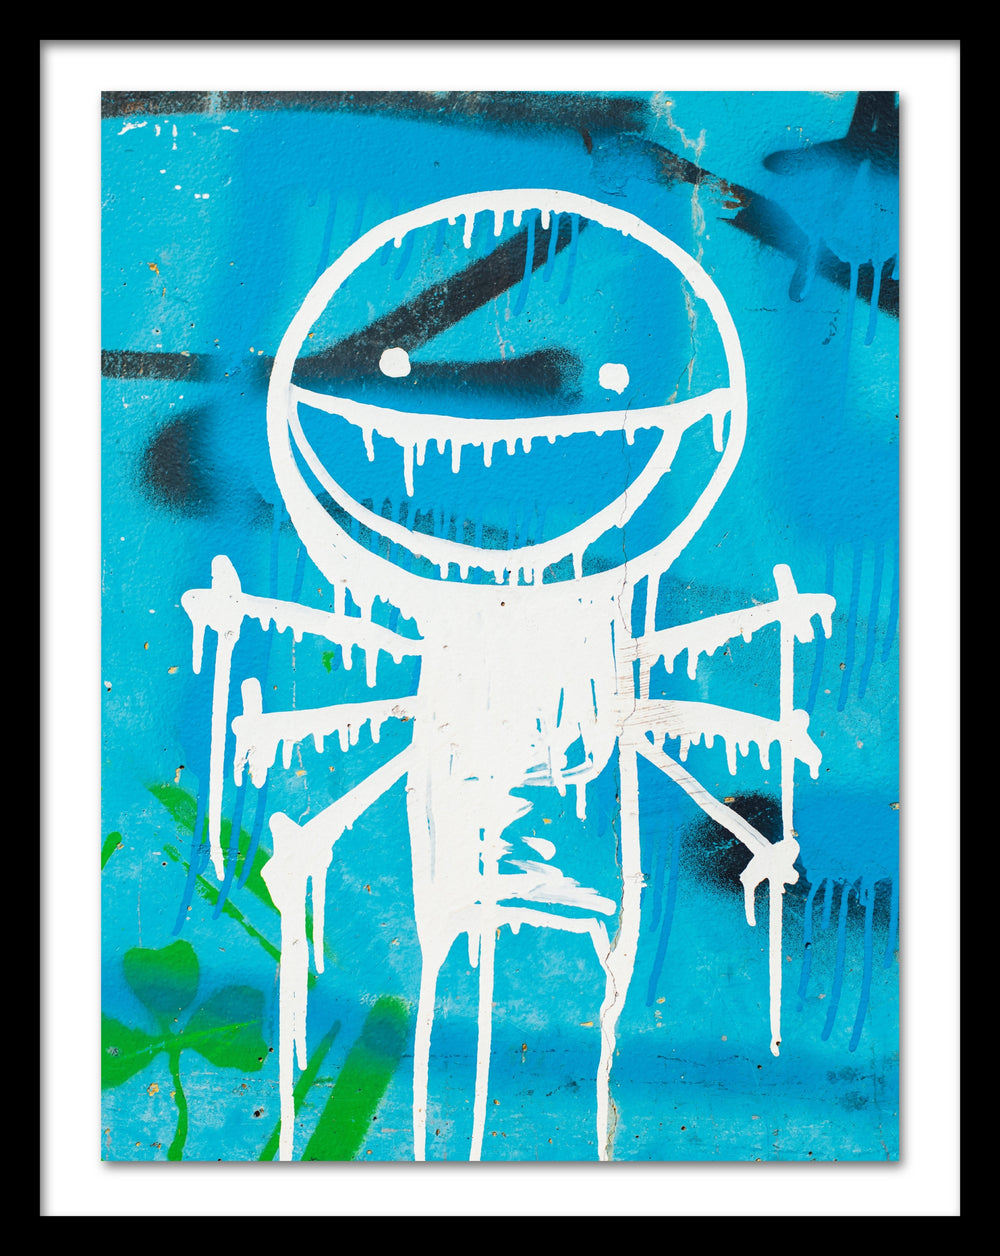 A poster that depicts a white graffiti on a blue wall